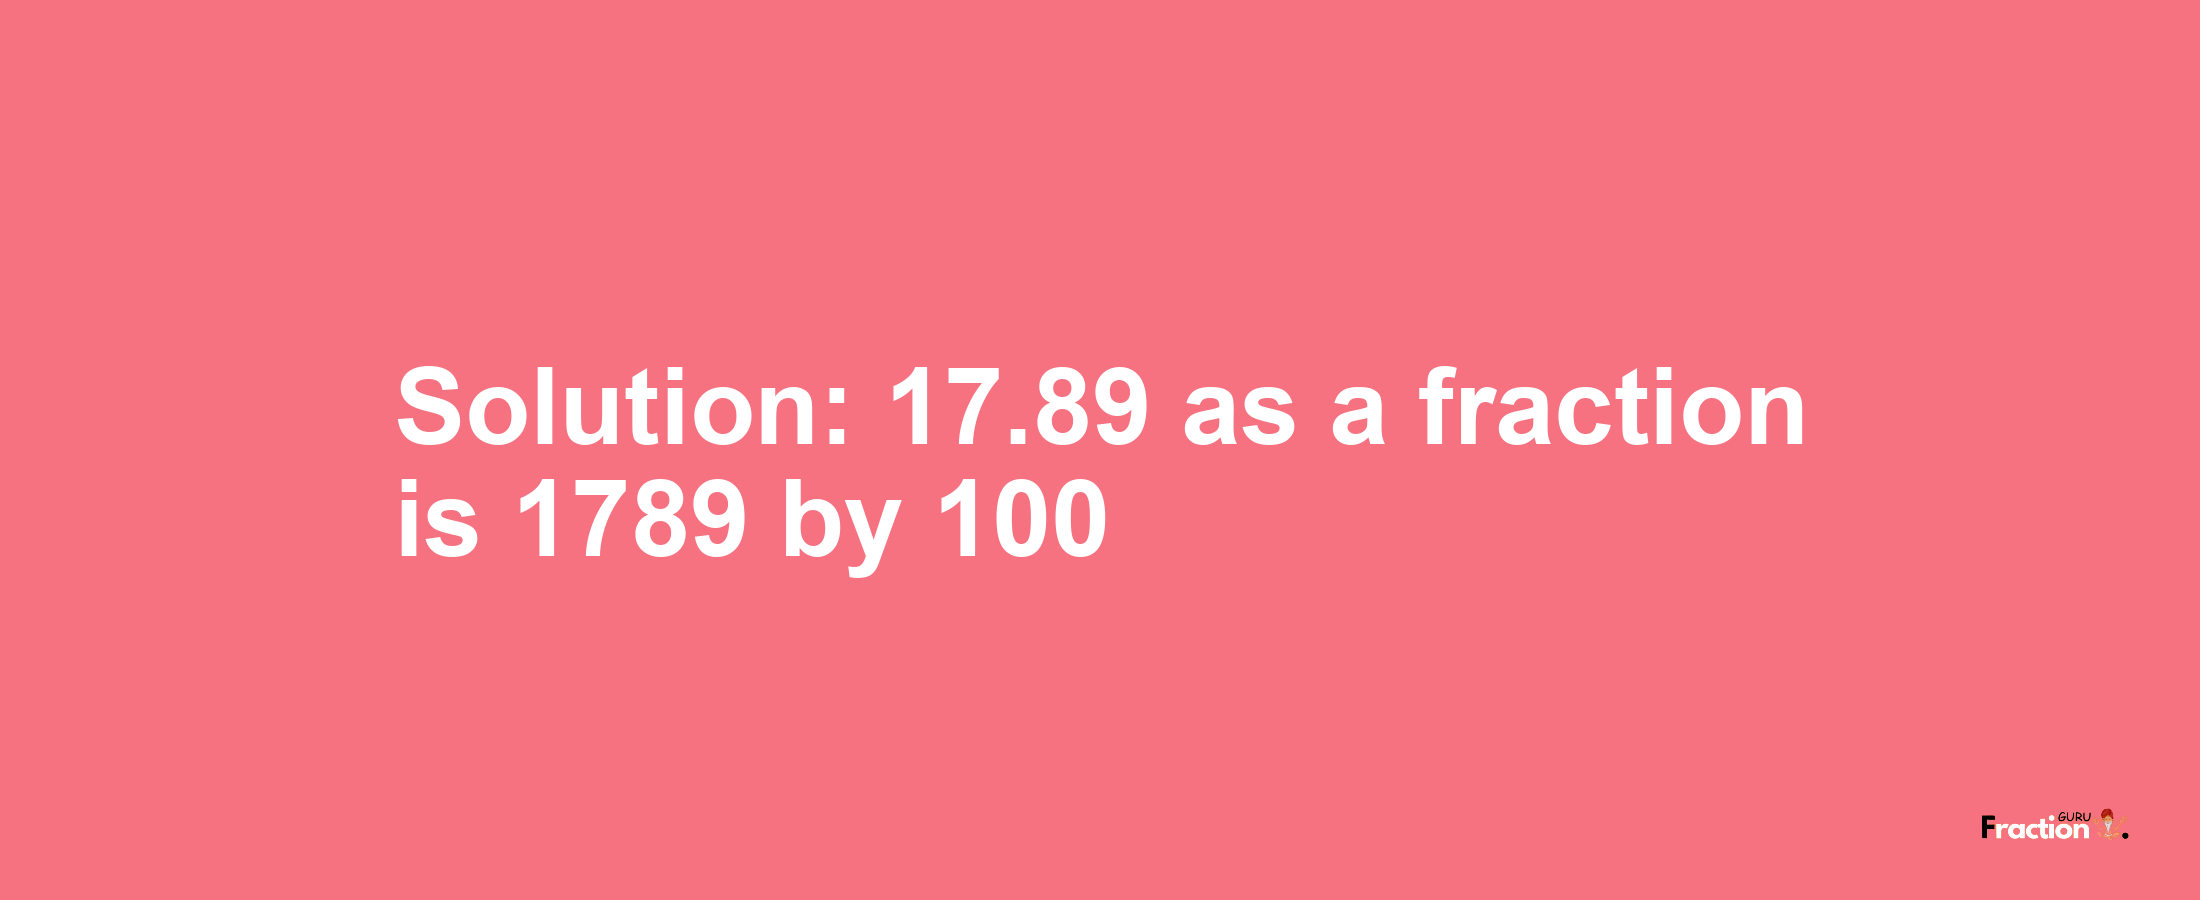 Solution:17.89 as a fraction is 1789/100